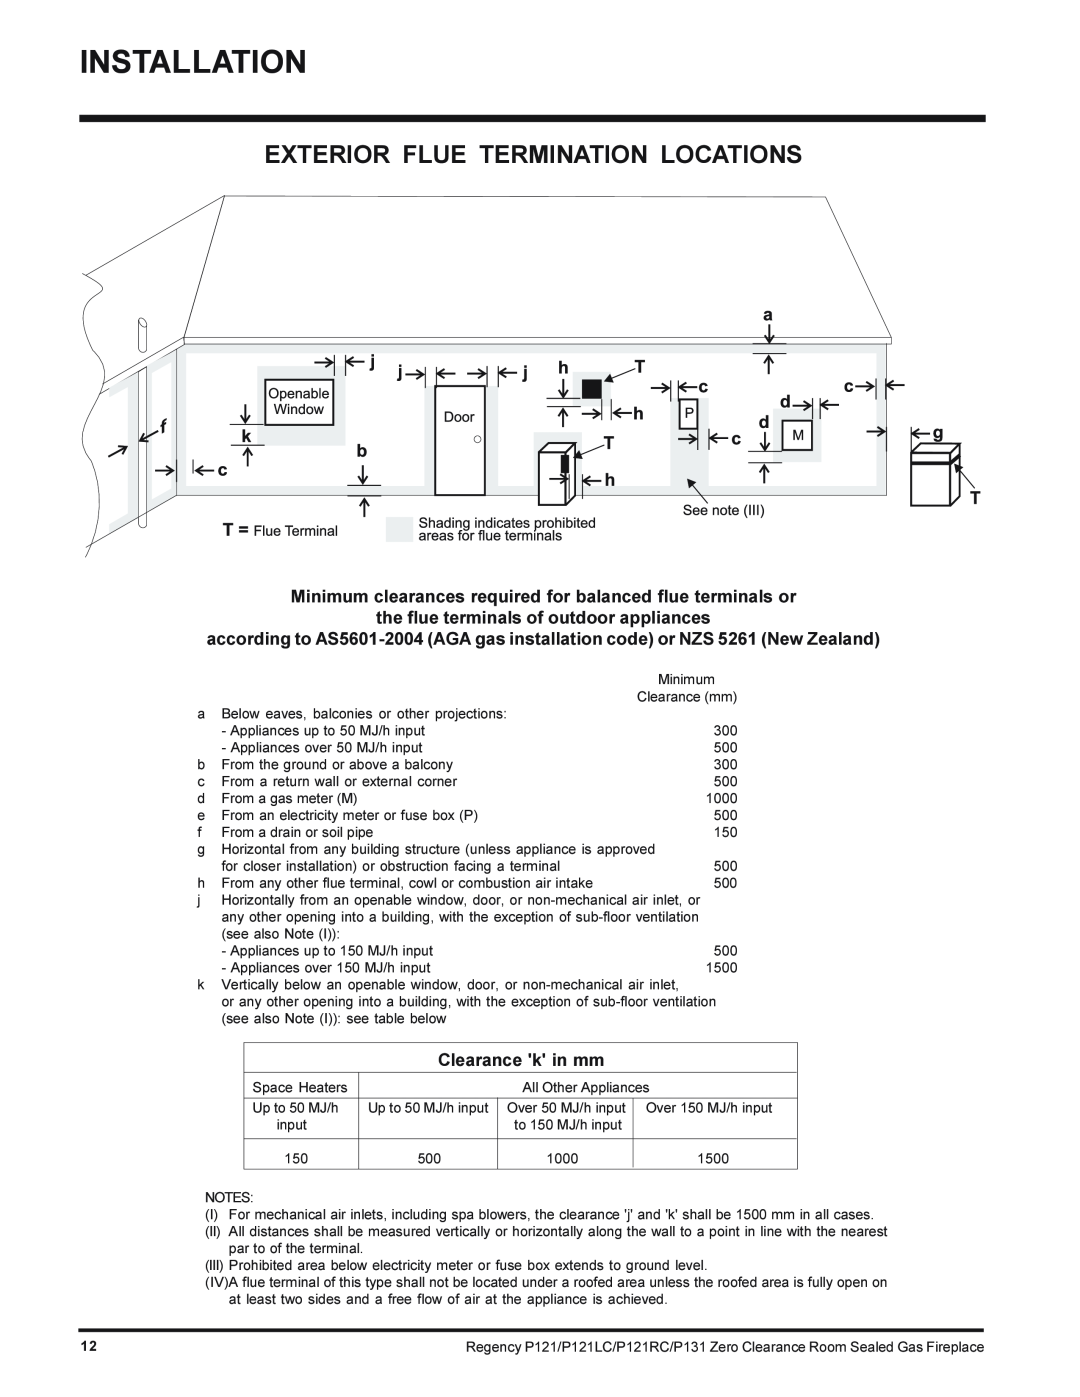 Regency P131-NG, P121-NG Exterior Flue Termination Locations, the flue terminals of outdoor appliances, Clearance k in mm 